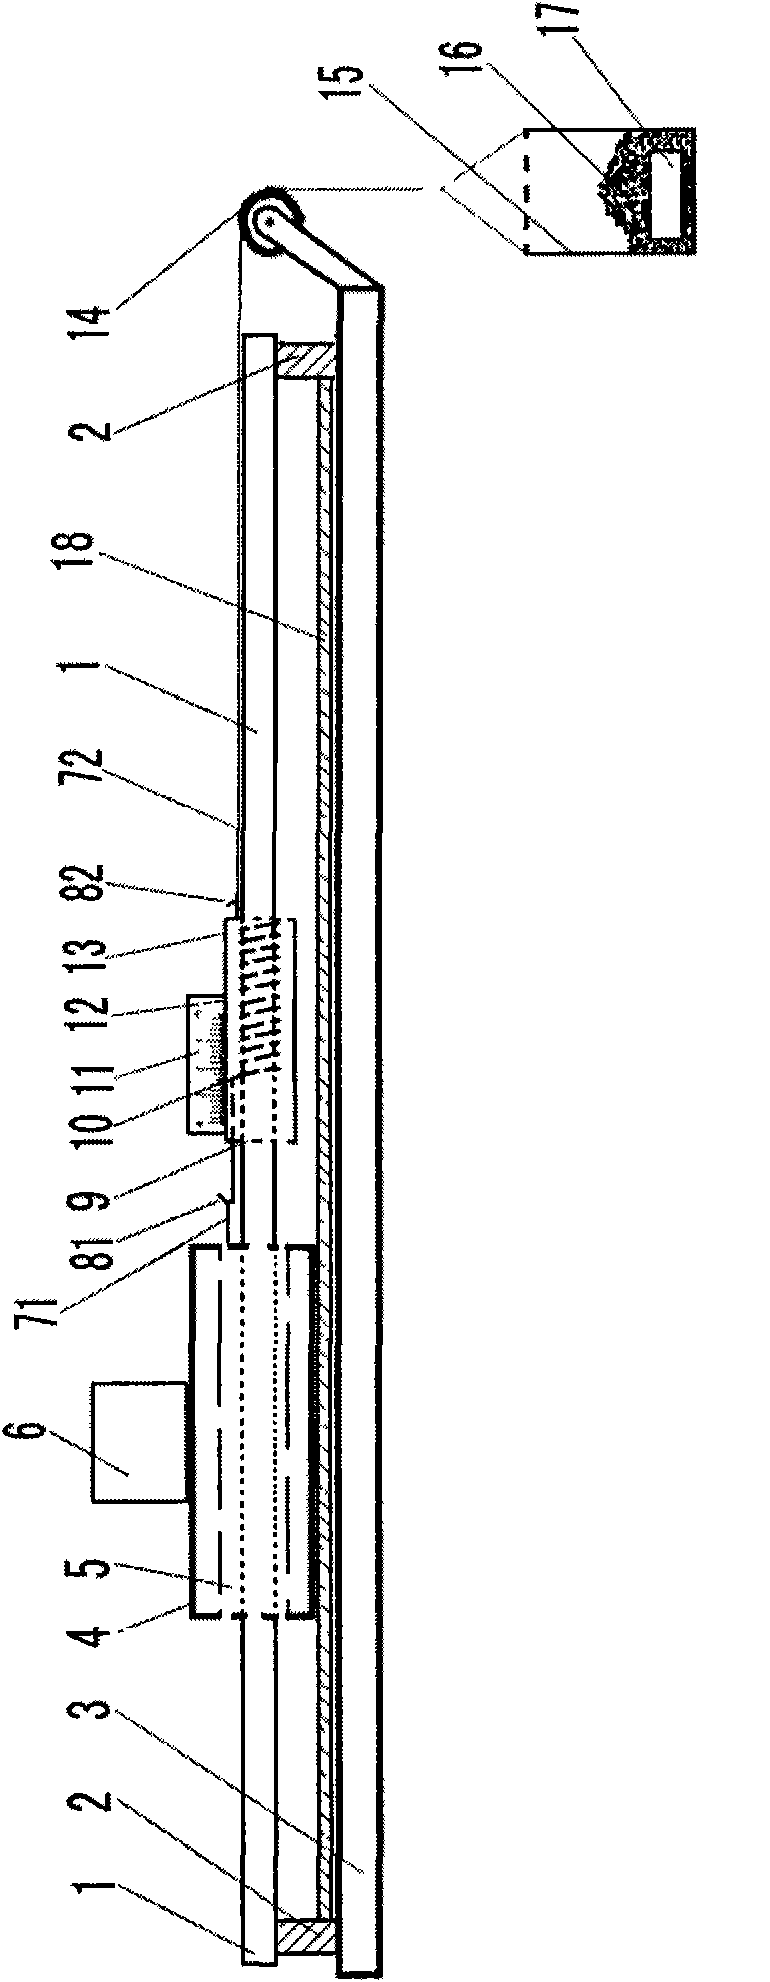 Frictional force experiment instrument